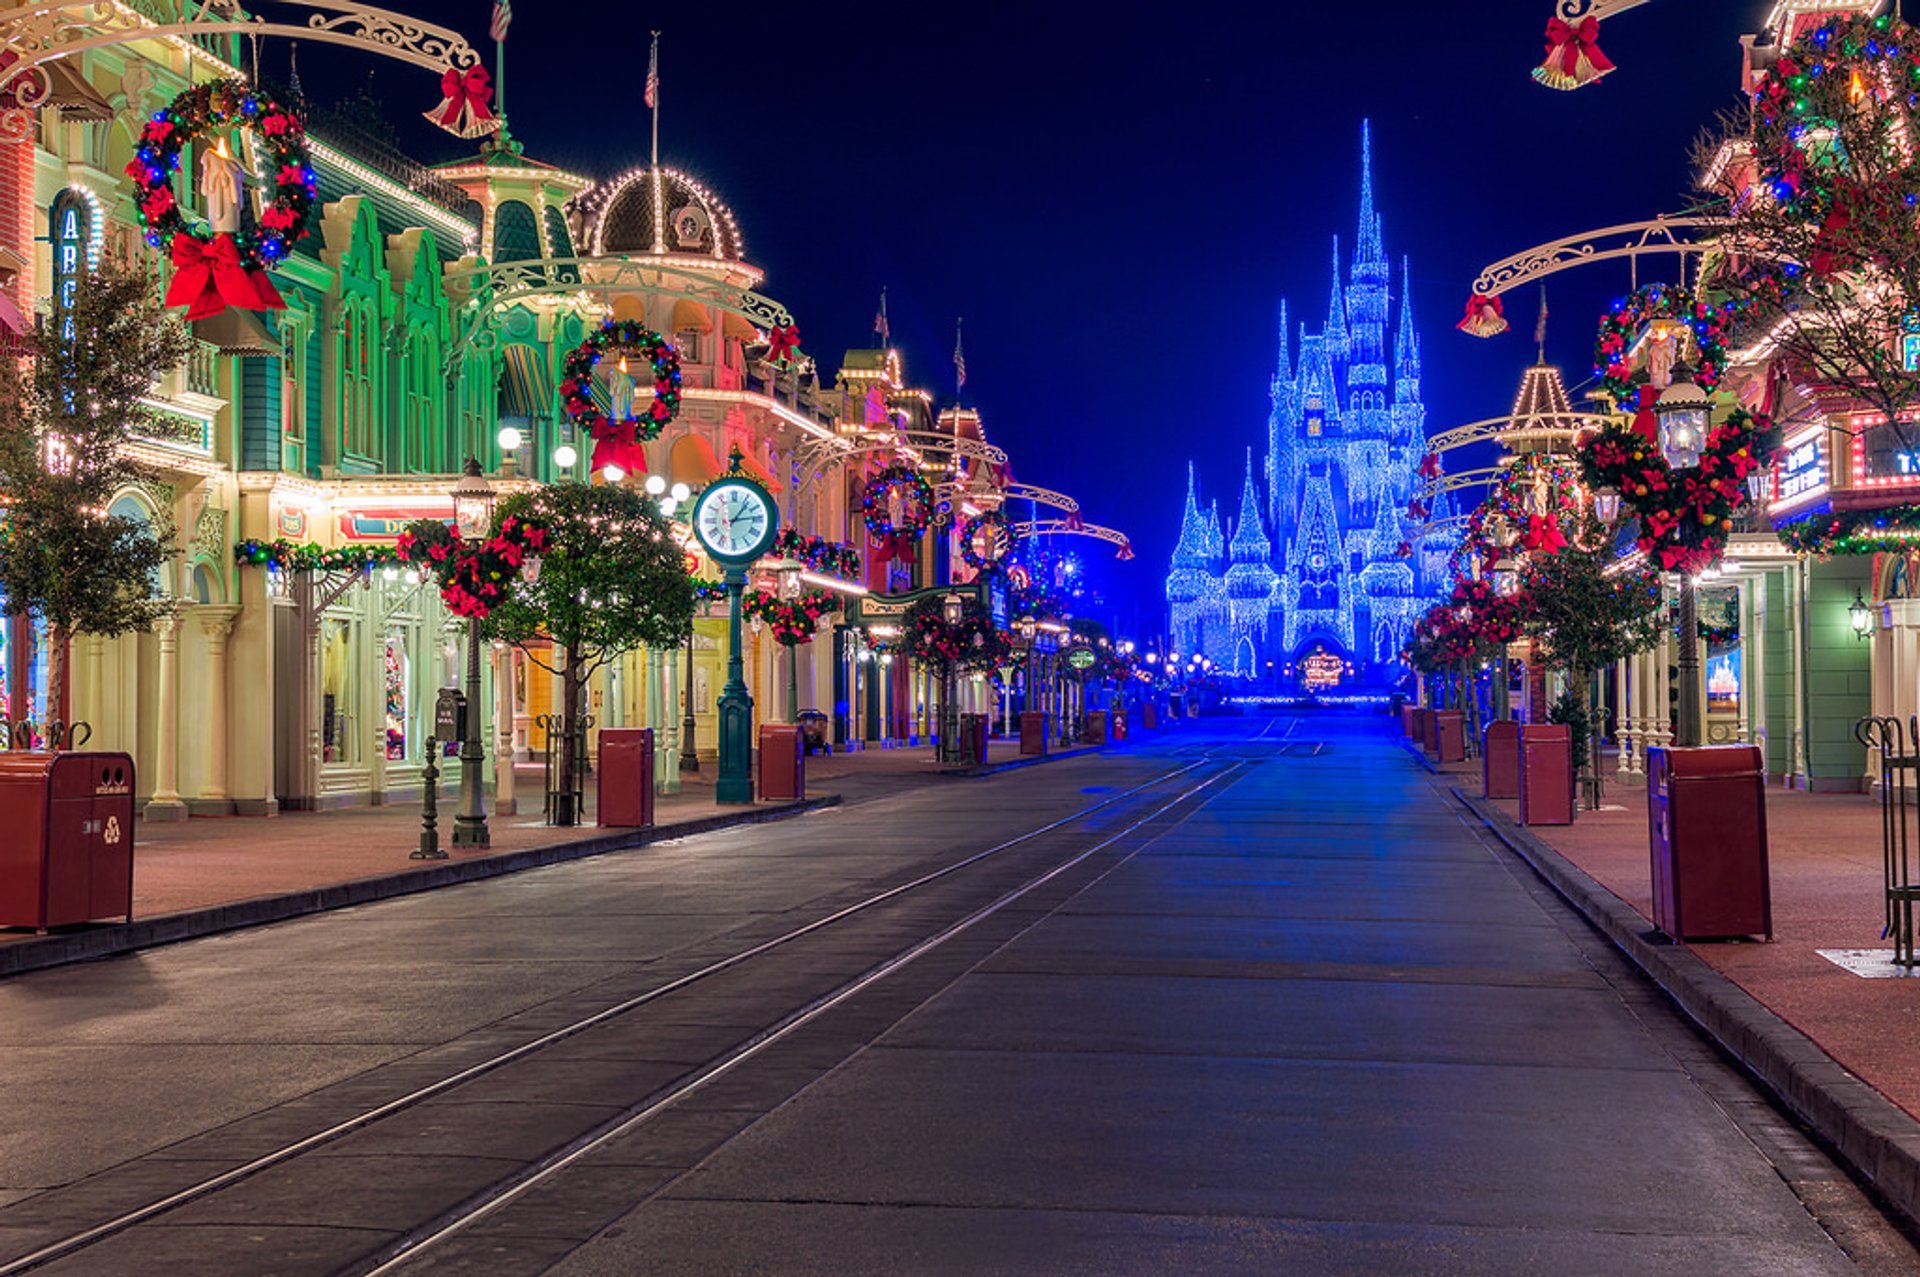 When Does Disneyland Decorate For Christmas?